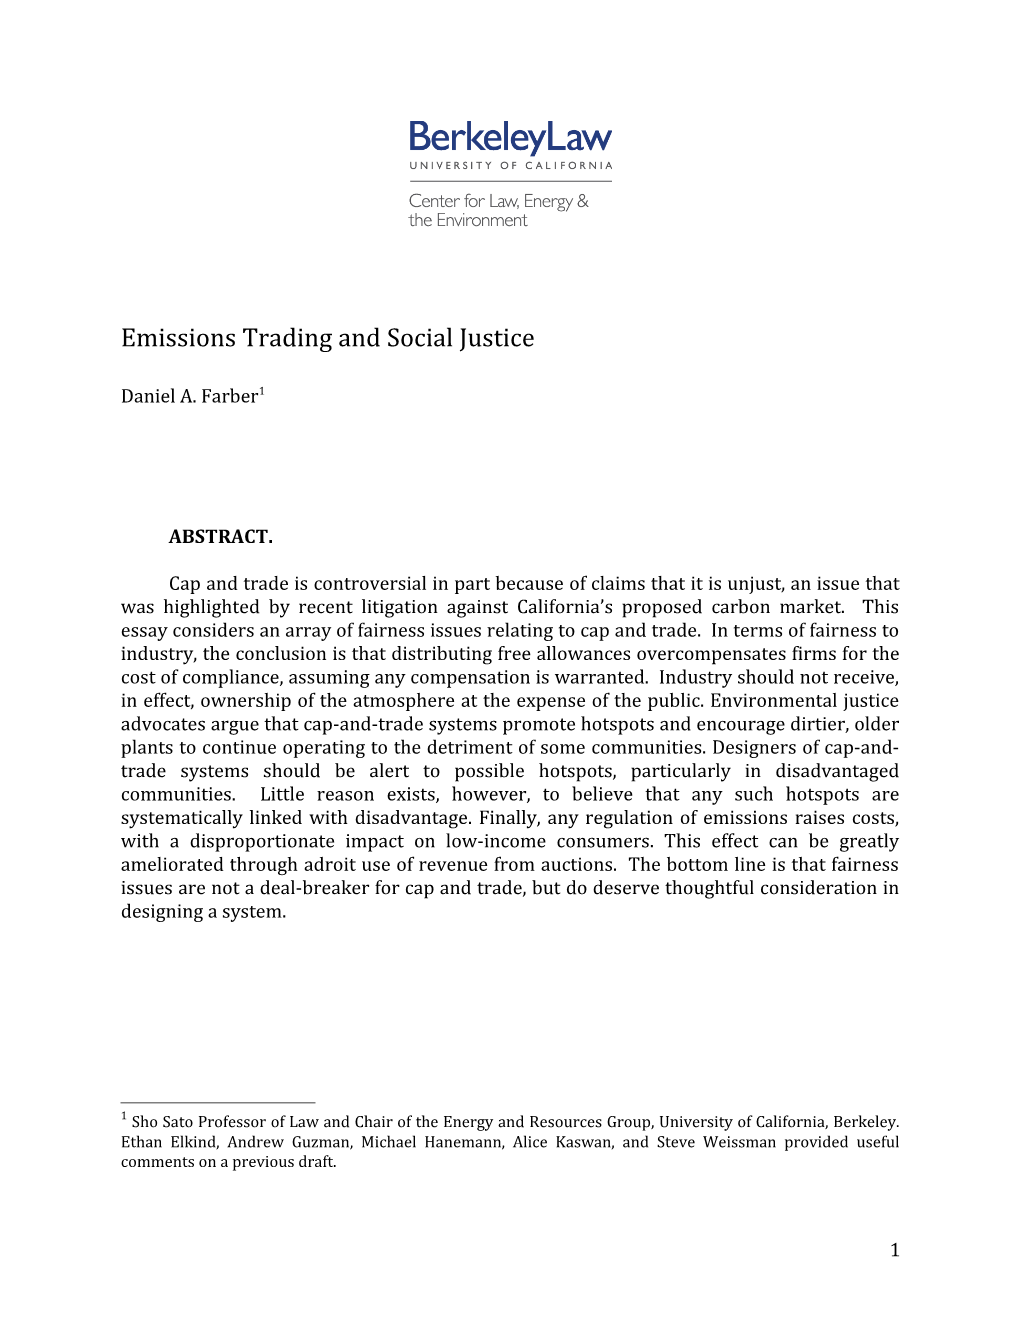 Emissions Trading and Social Justice